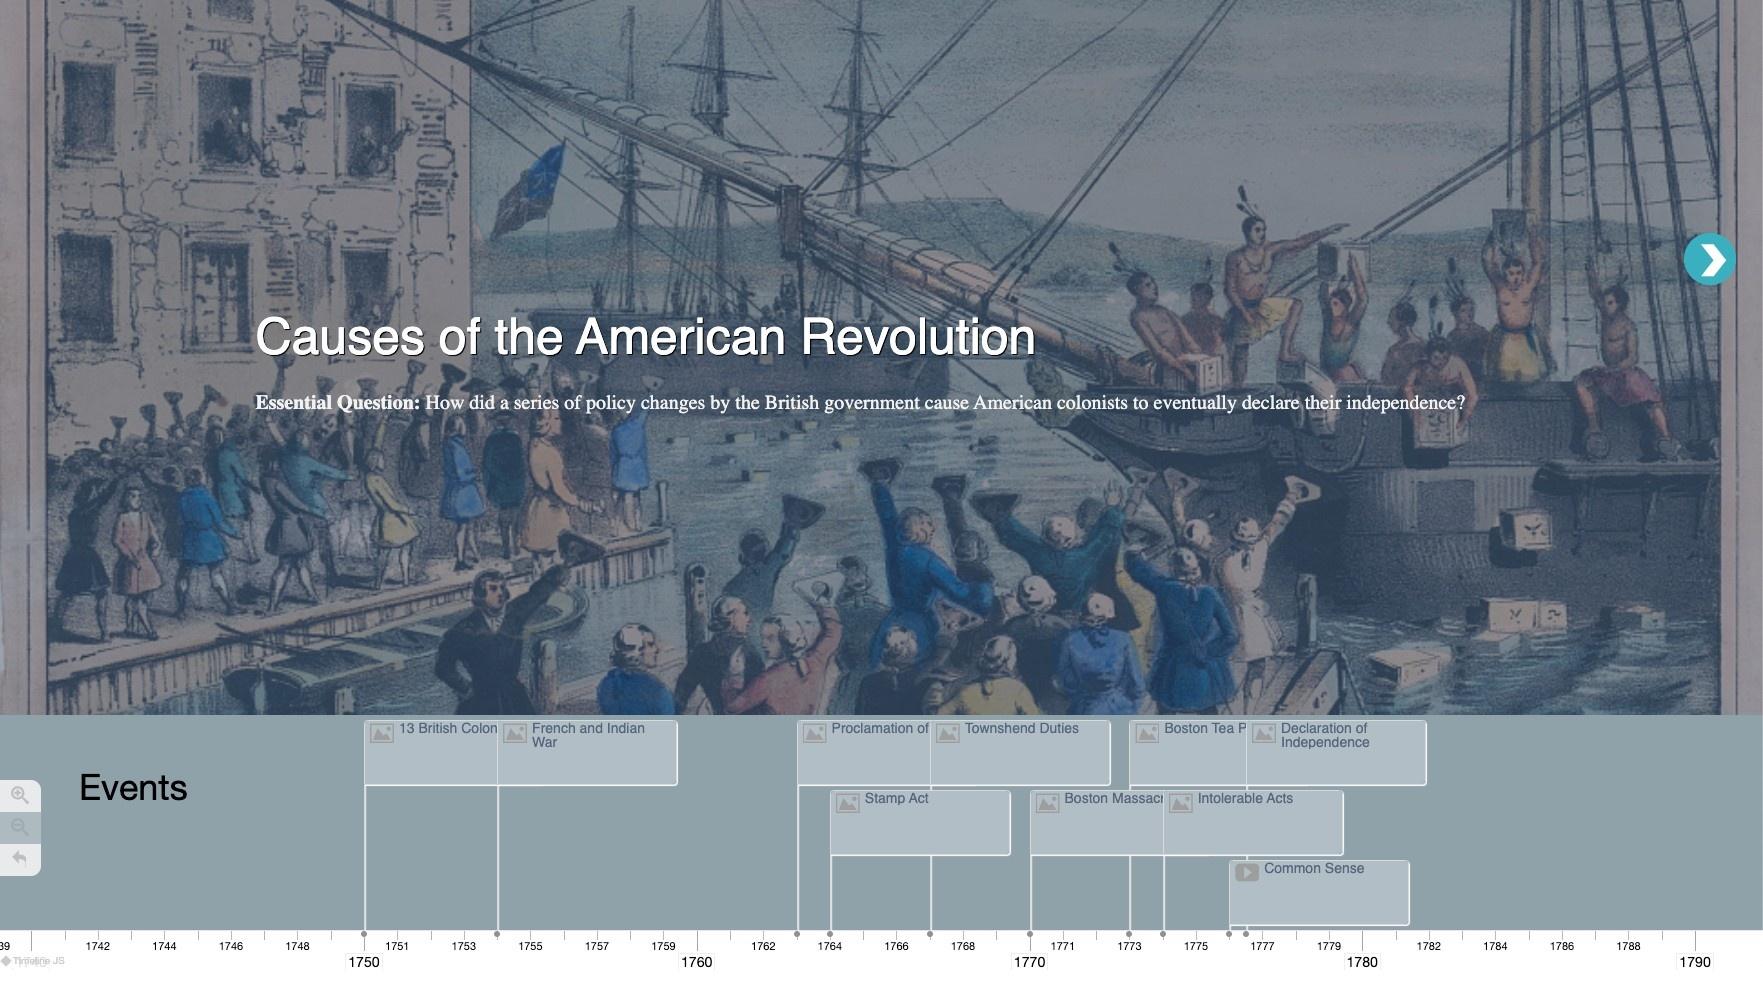 essay on causes of the american revolution